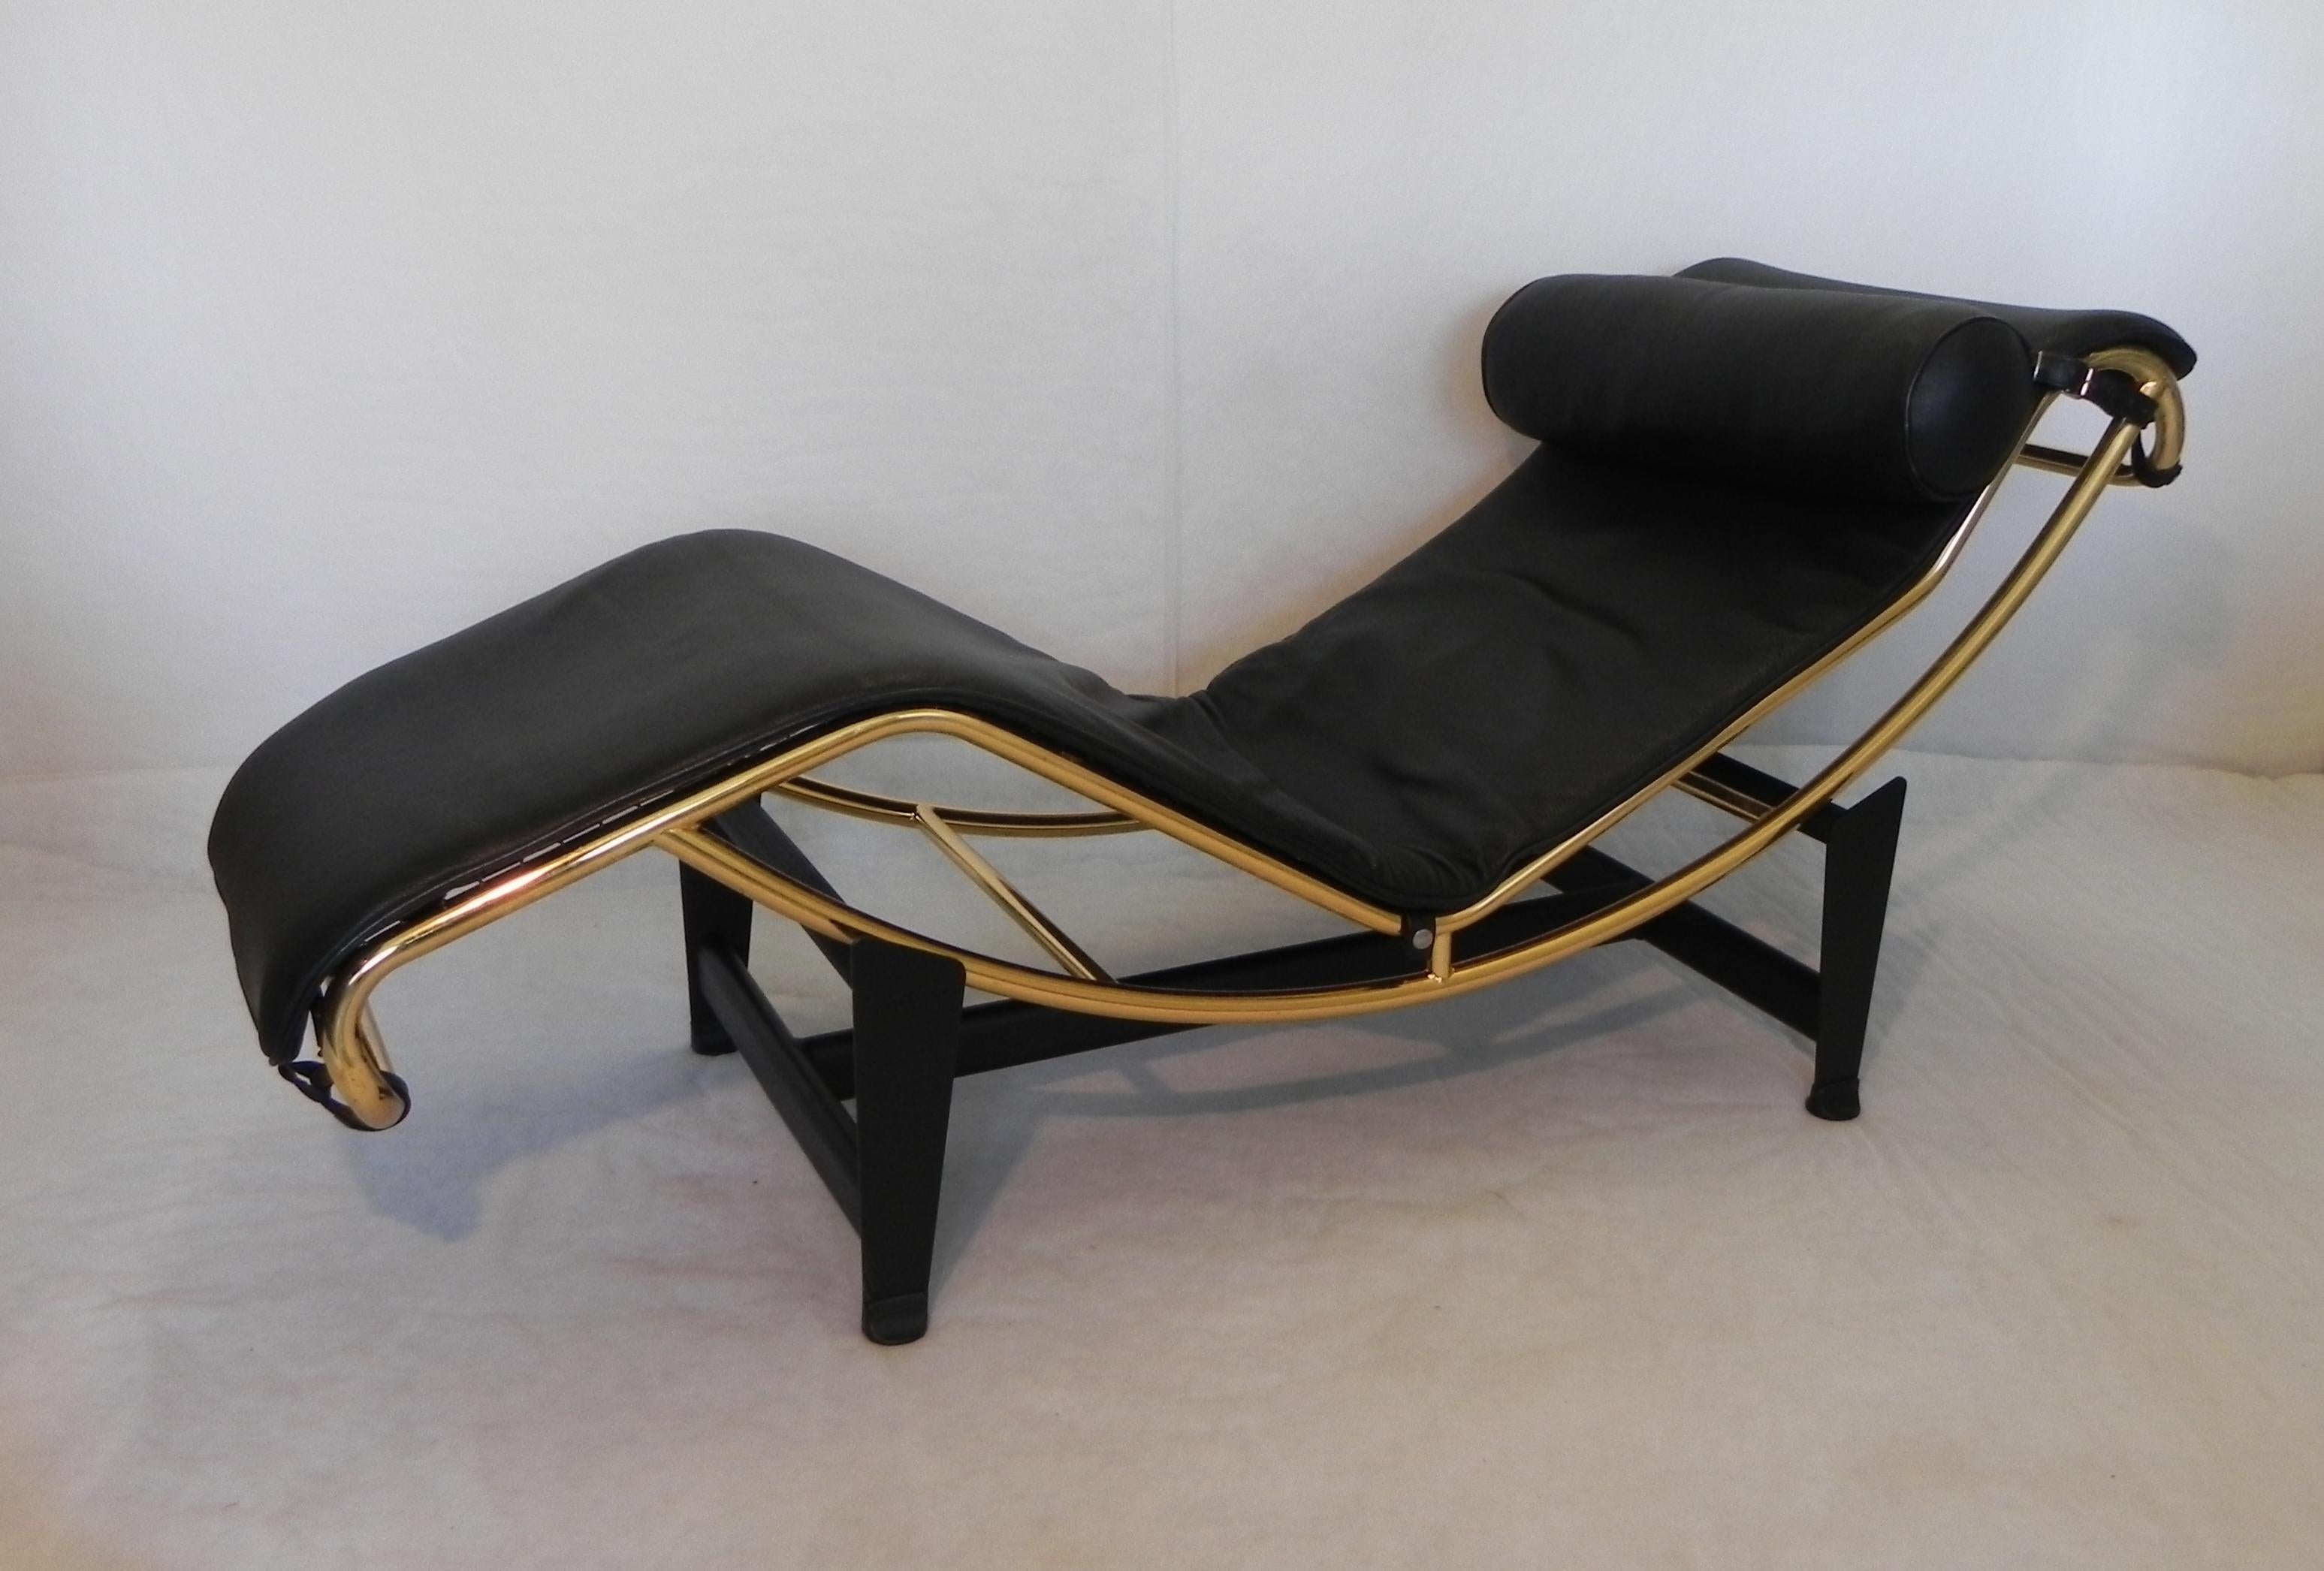 Bauhaus-inspired chaise longue, limited edition. 1980s. galvanized shaft GOLD color. (one of a kind). black base, high quality leather cushioning black color. armchair is used, bears few signs of time. photographed here with its Cage side table, by